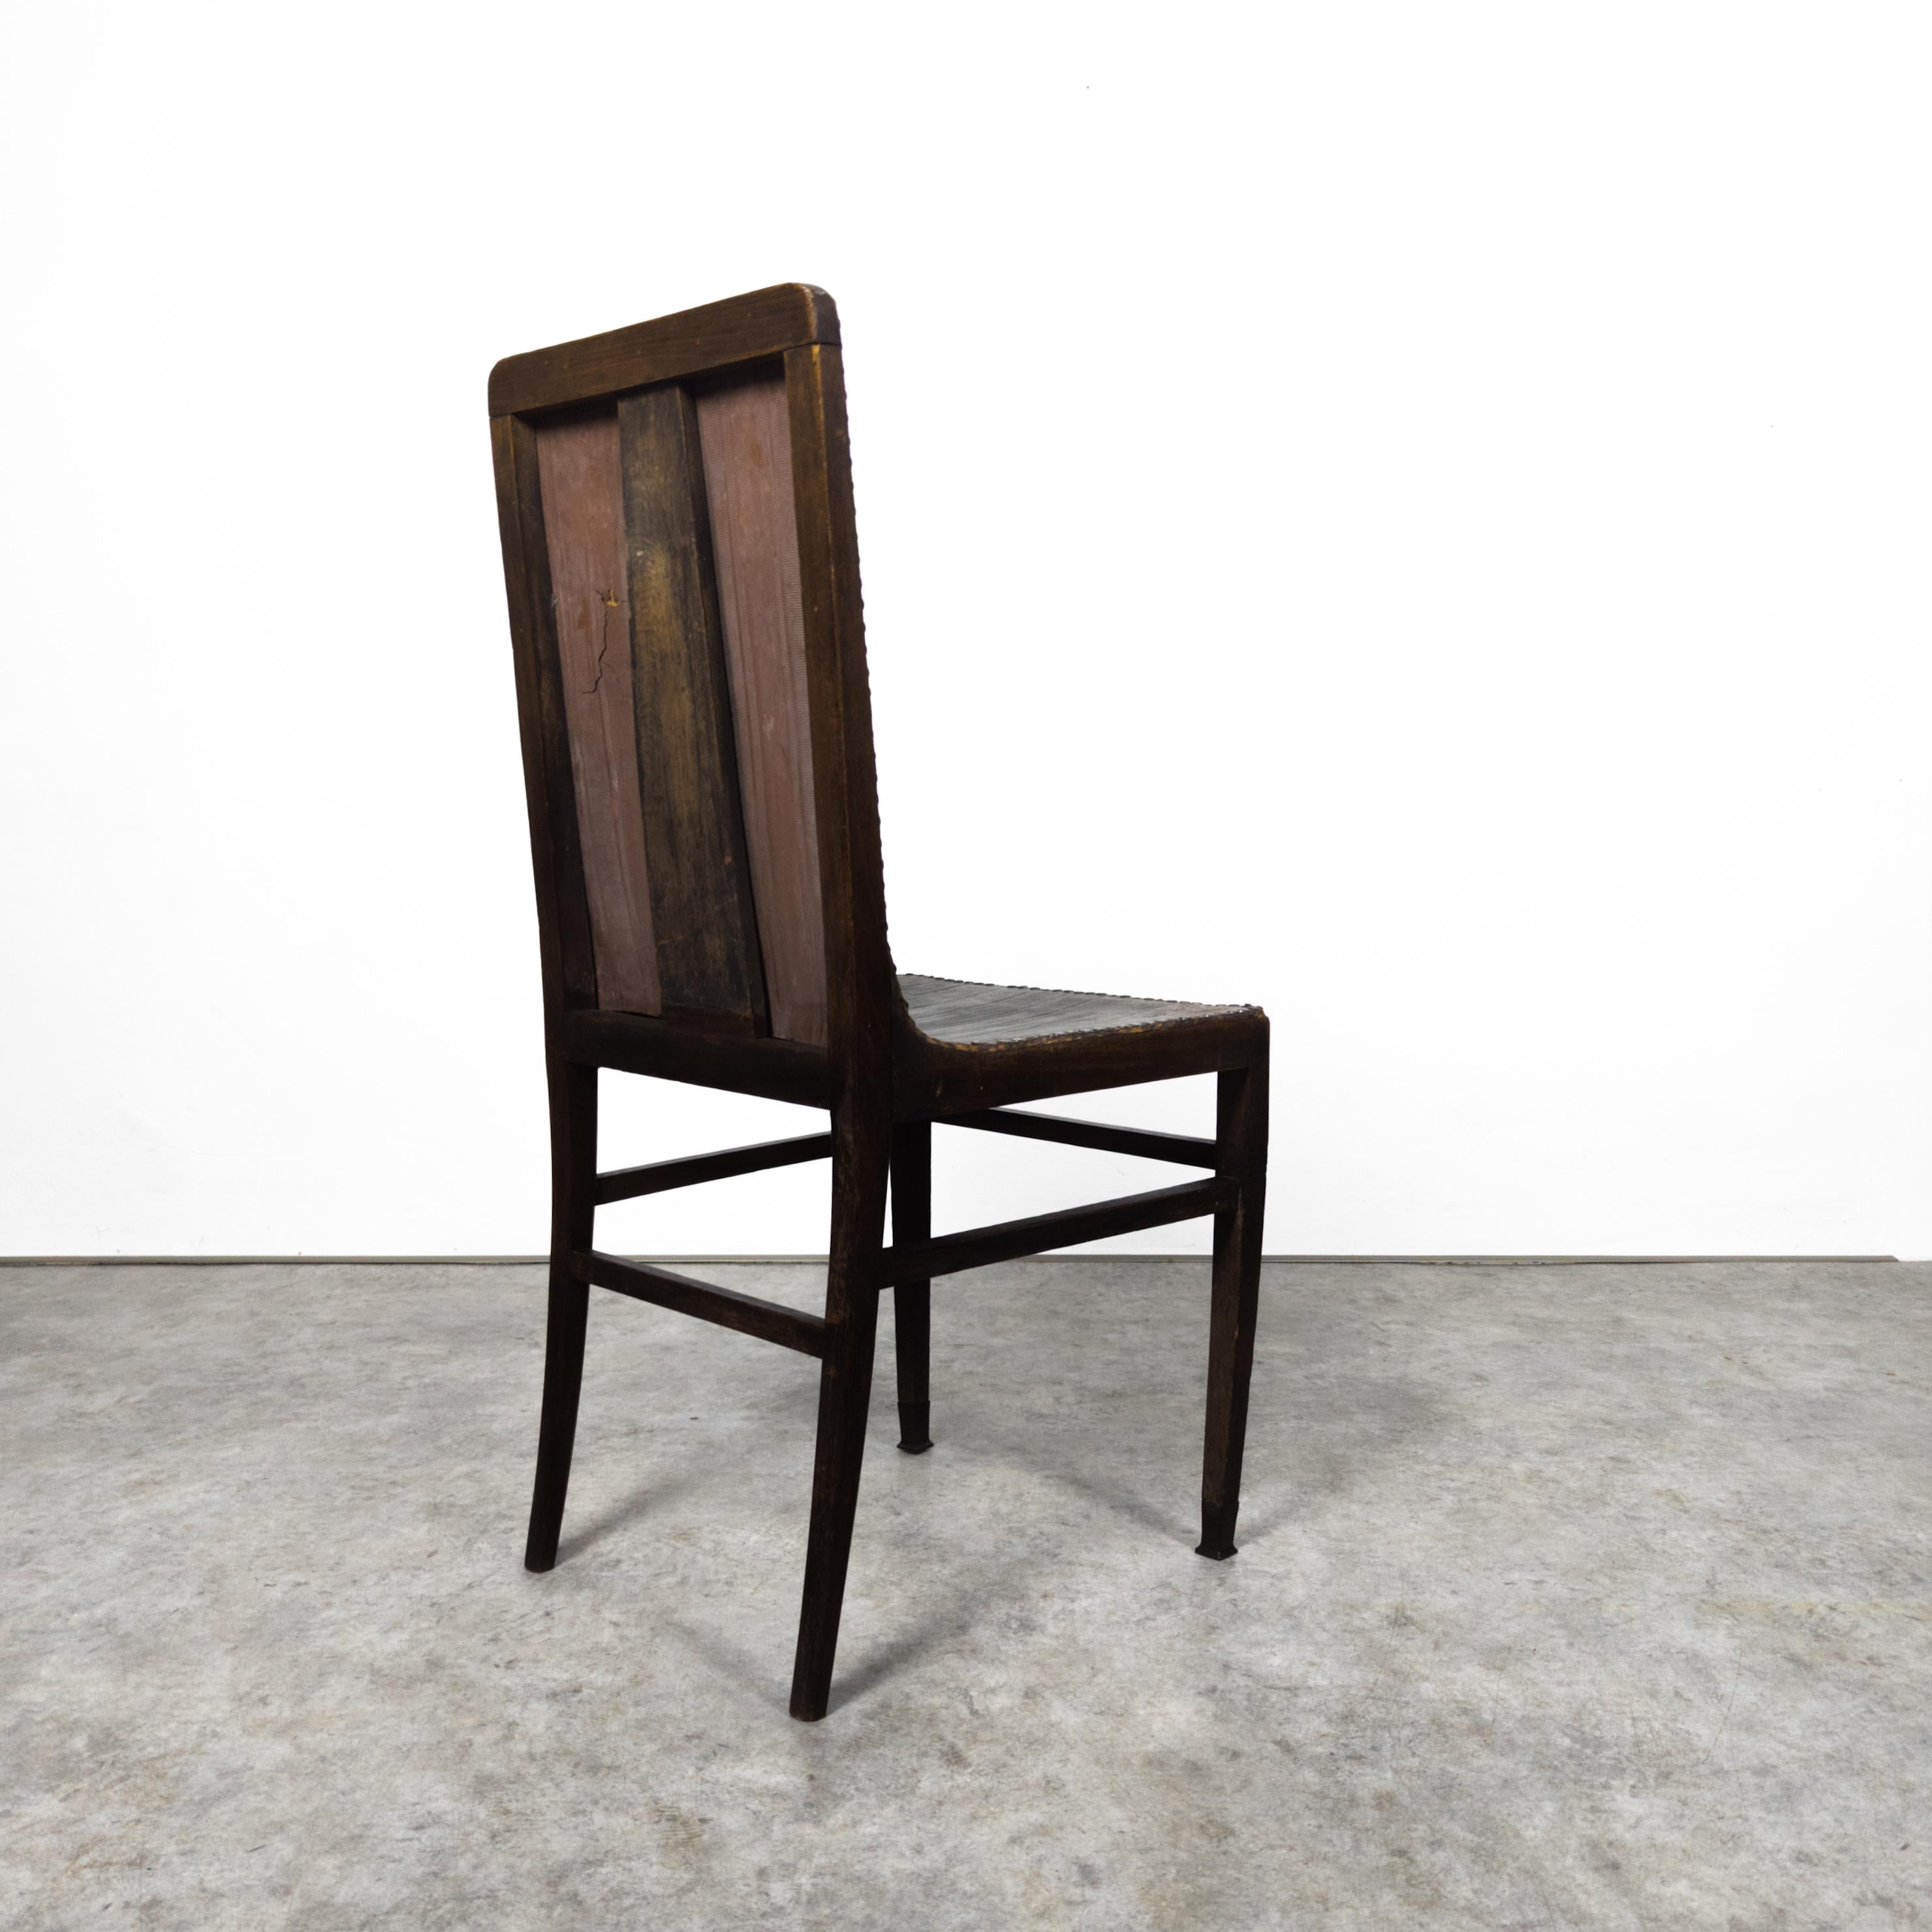 Early 20th Century Early Josef Urban chair No. 405 For Sale